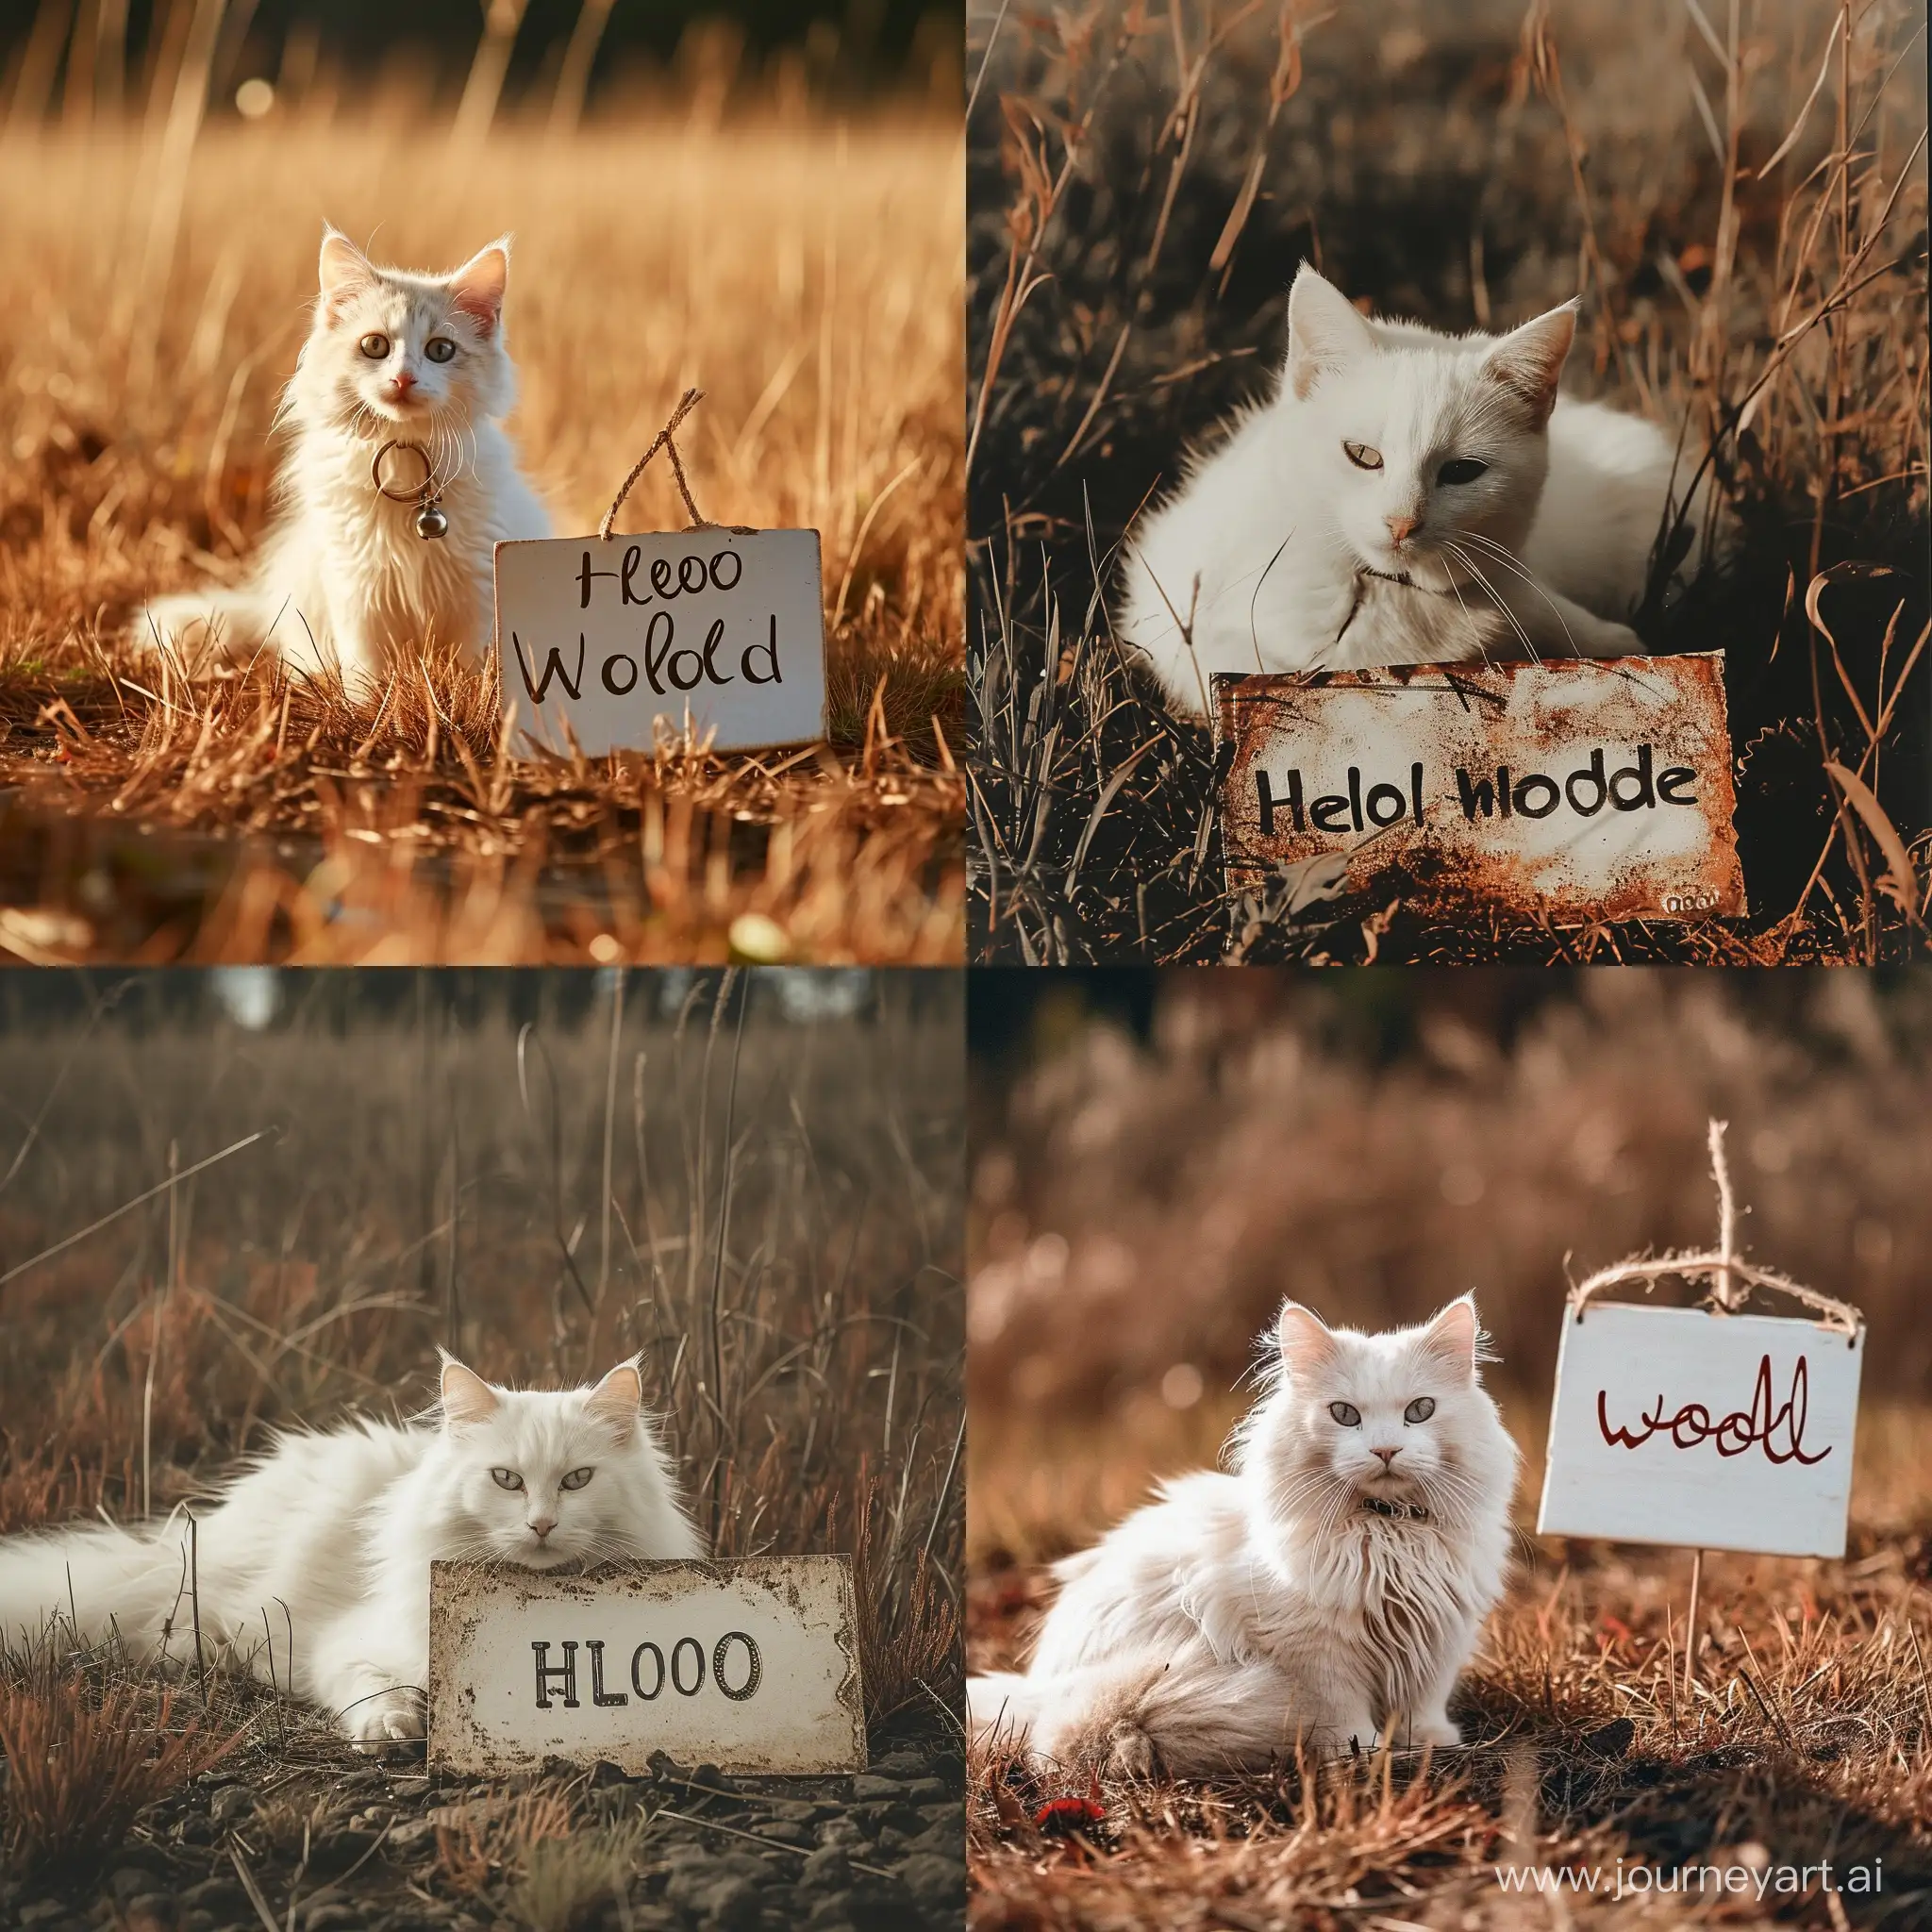 A photo of a white cat with a sign that says "hello world" in the field.